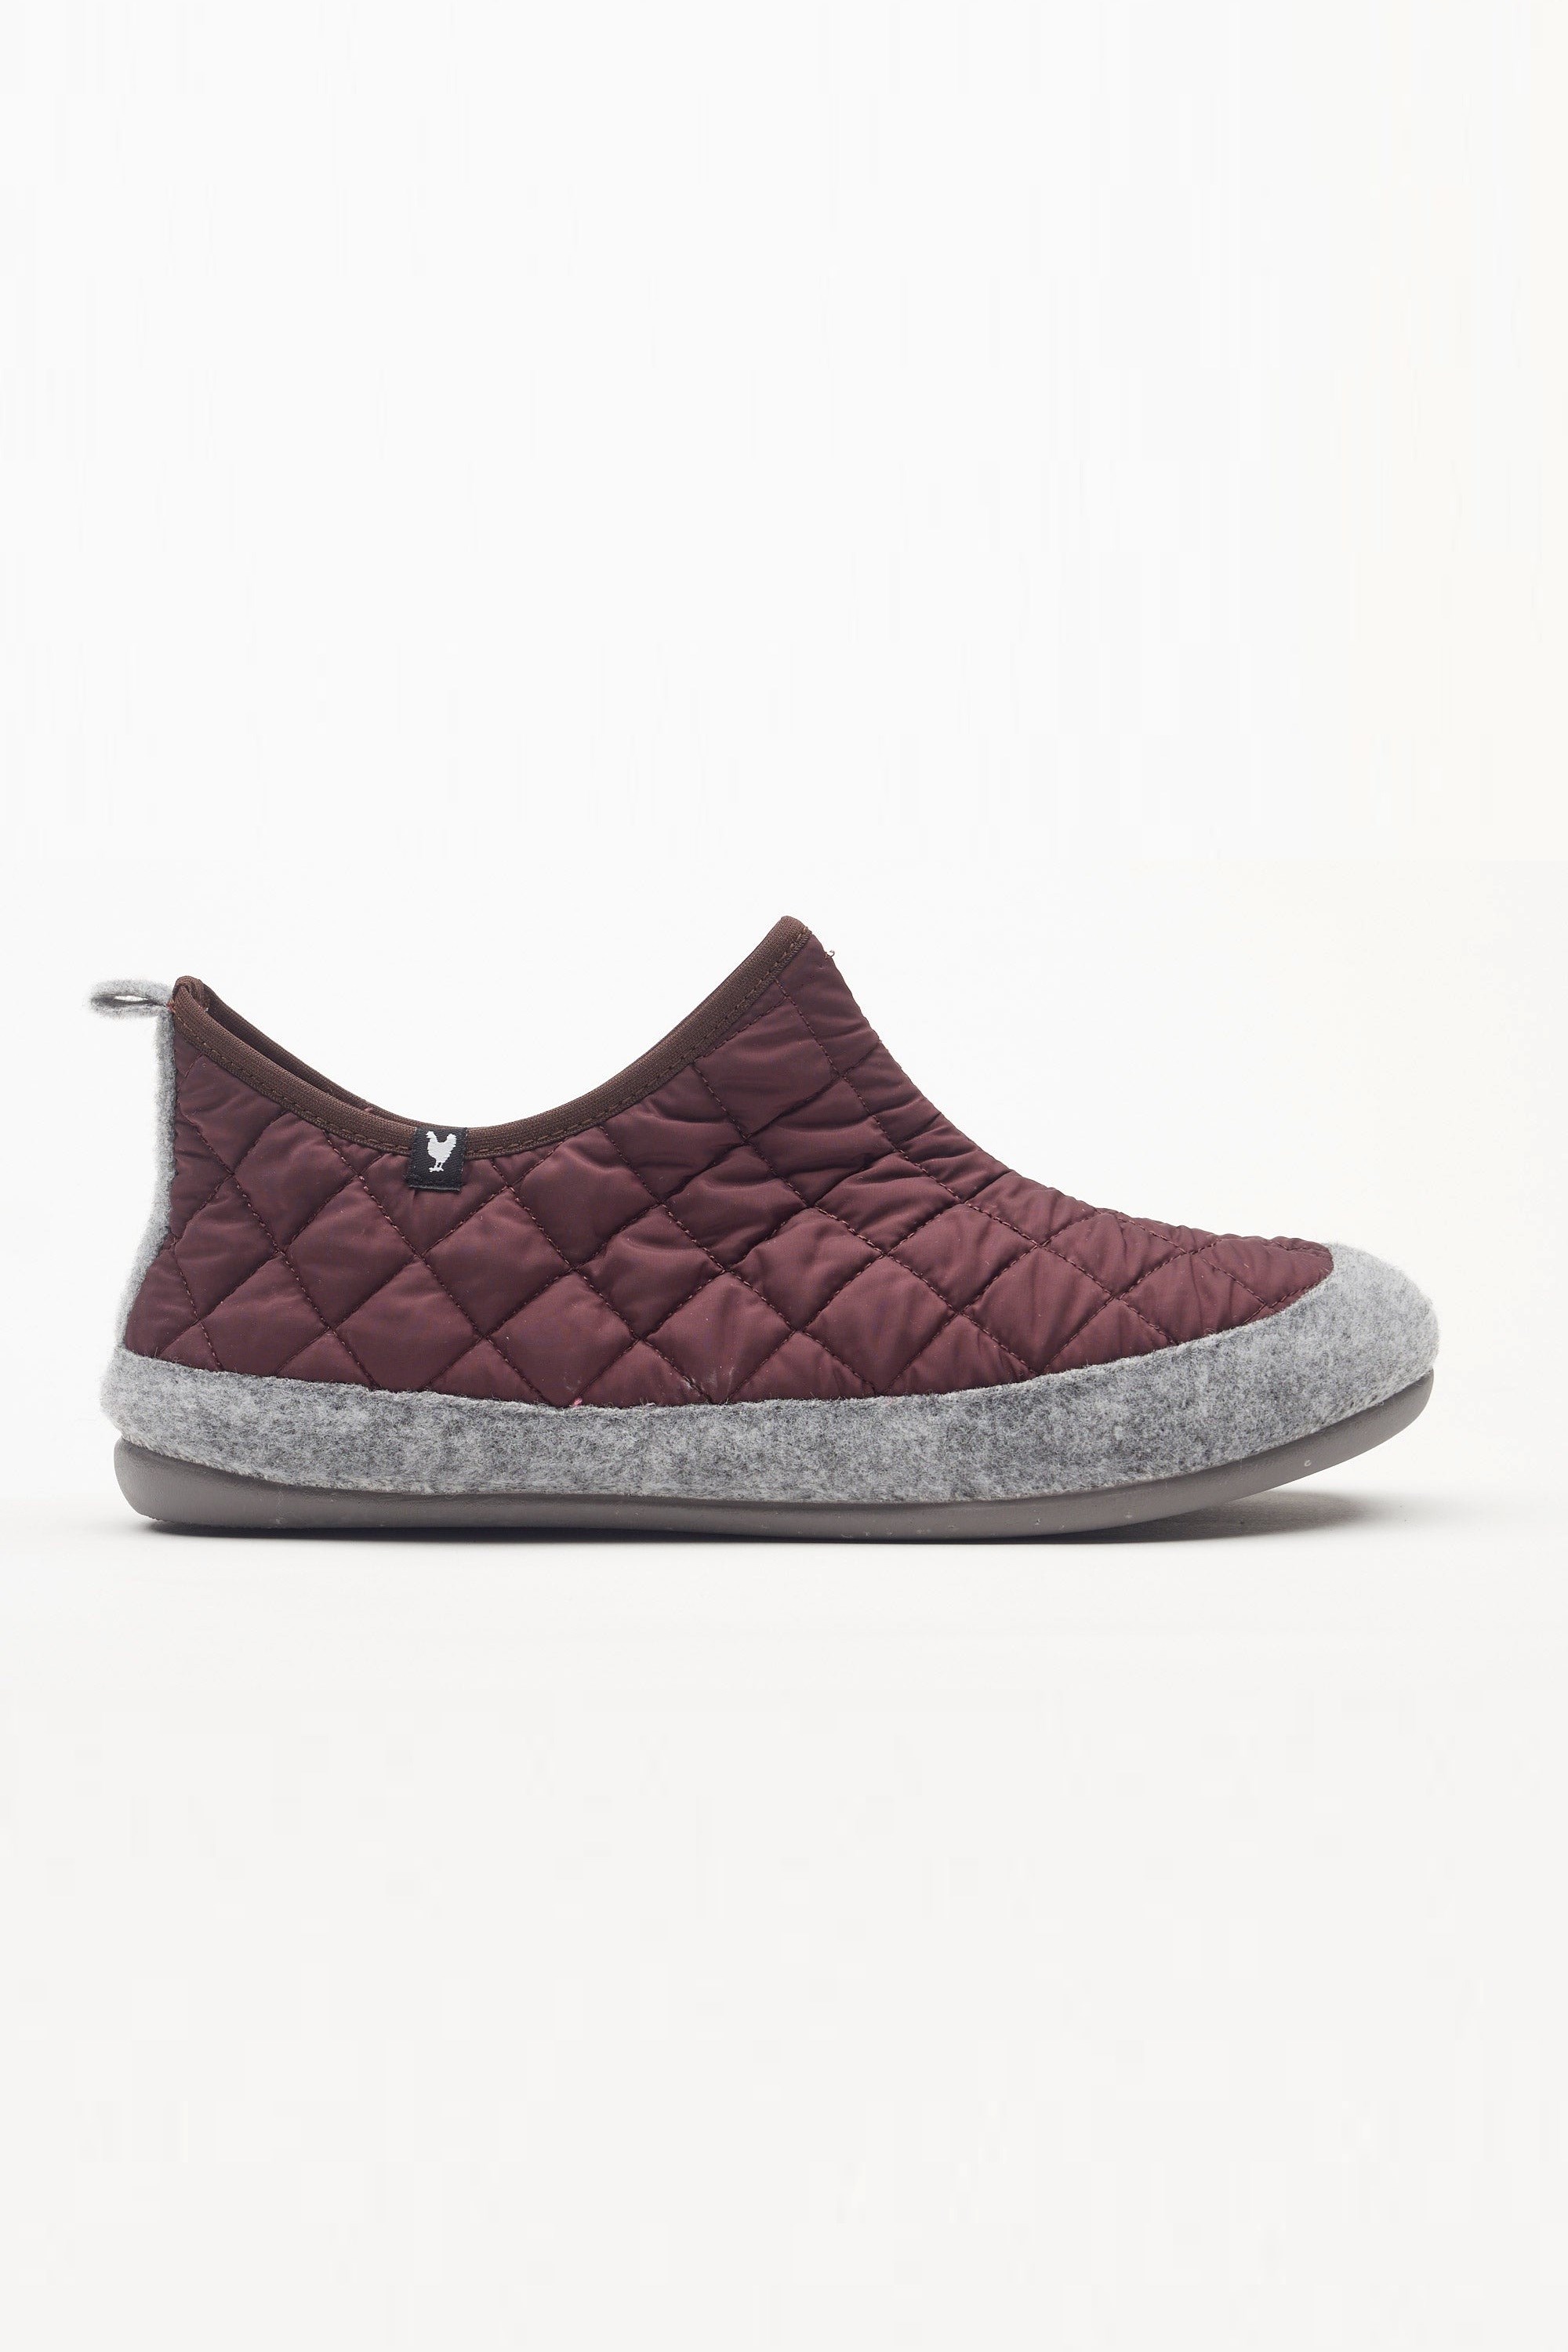 Pitas Unisex Super Soft Quilted Slippers -